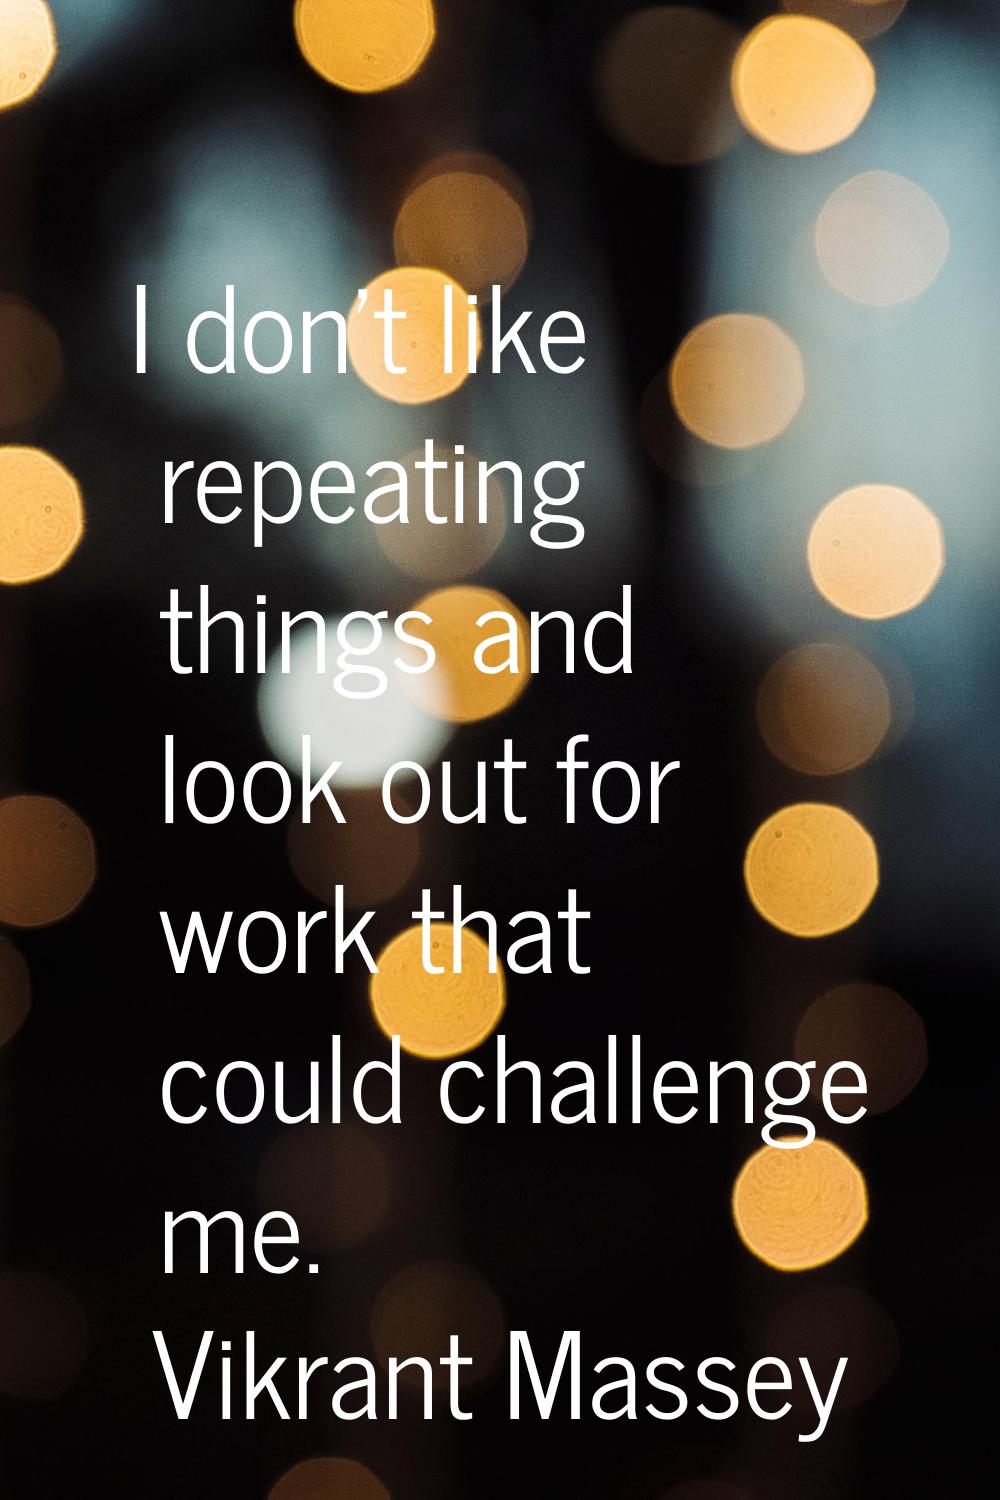 I don't like repeating things and look out for work that could challenge me.